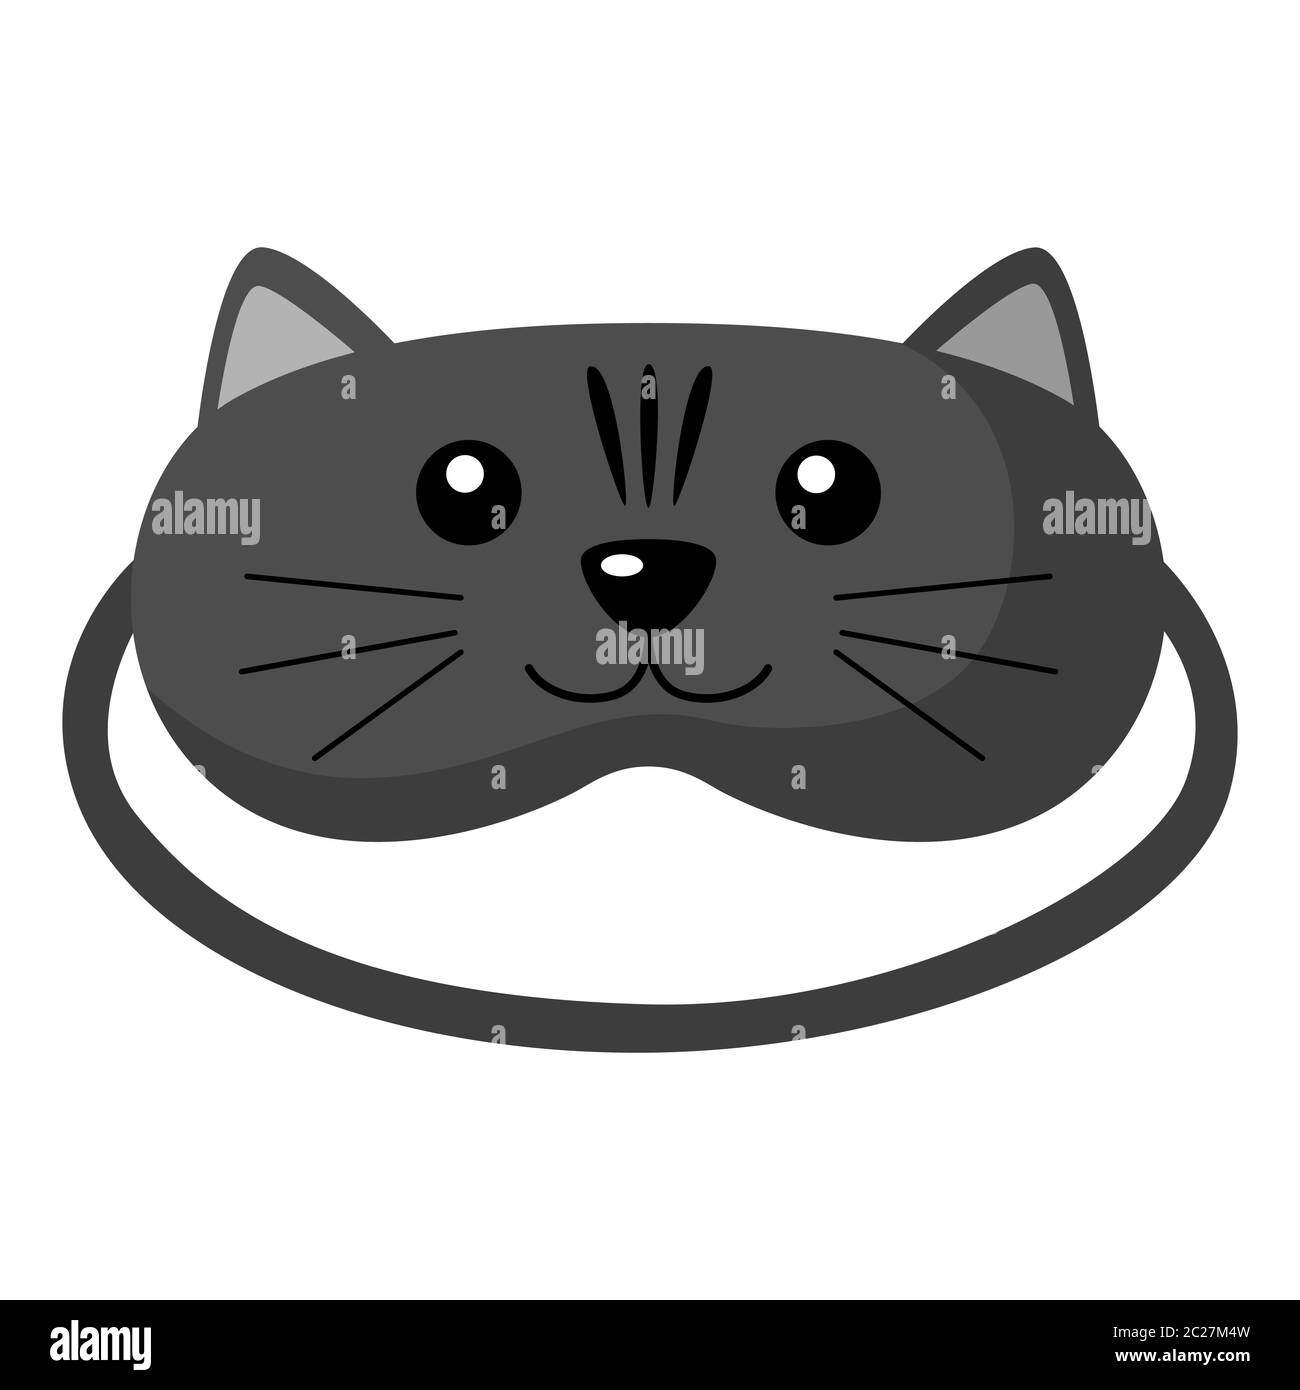 Children sleep mask cat on white background. Face mask for sleeping human isolated in flat style vector illustration. Stock Vector